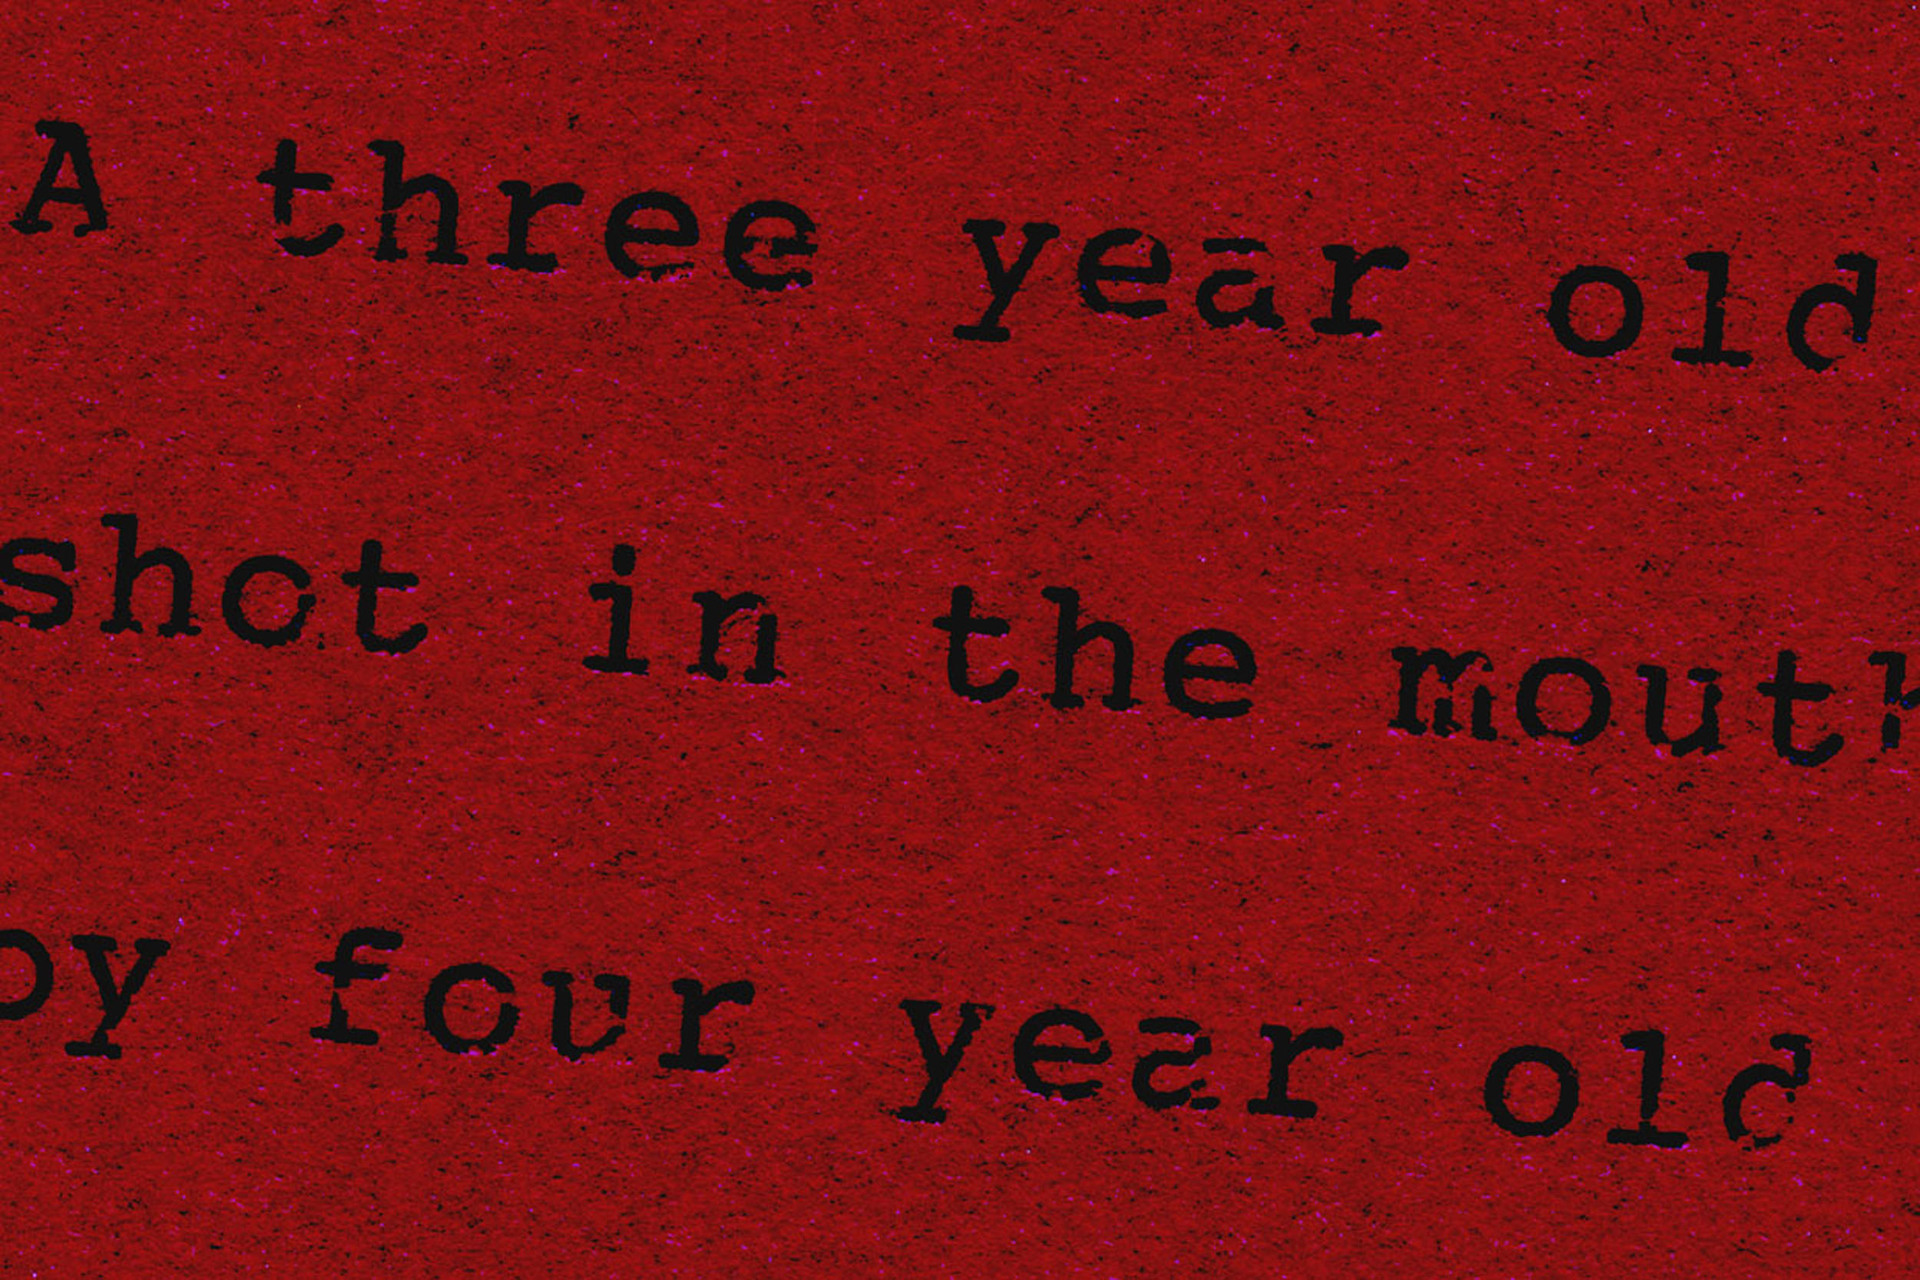 a red background with black printed words that say, "A three year old shot in the mouth by four year old" across the print.